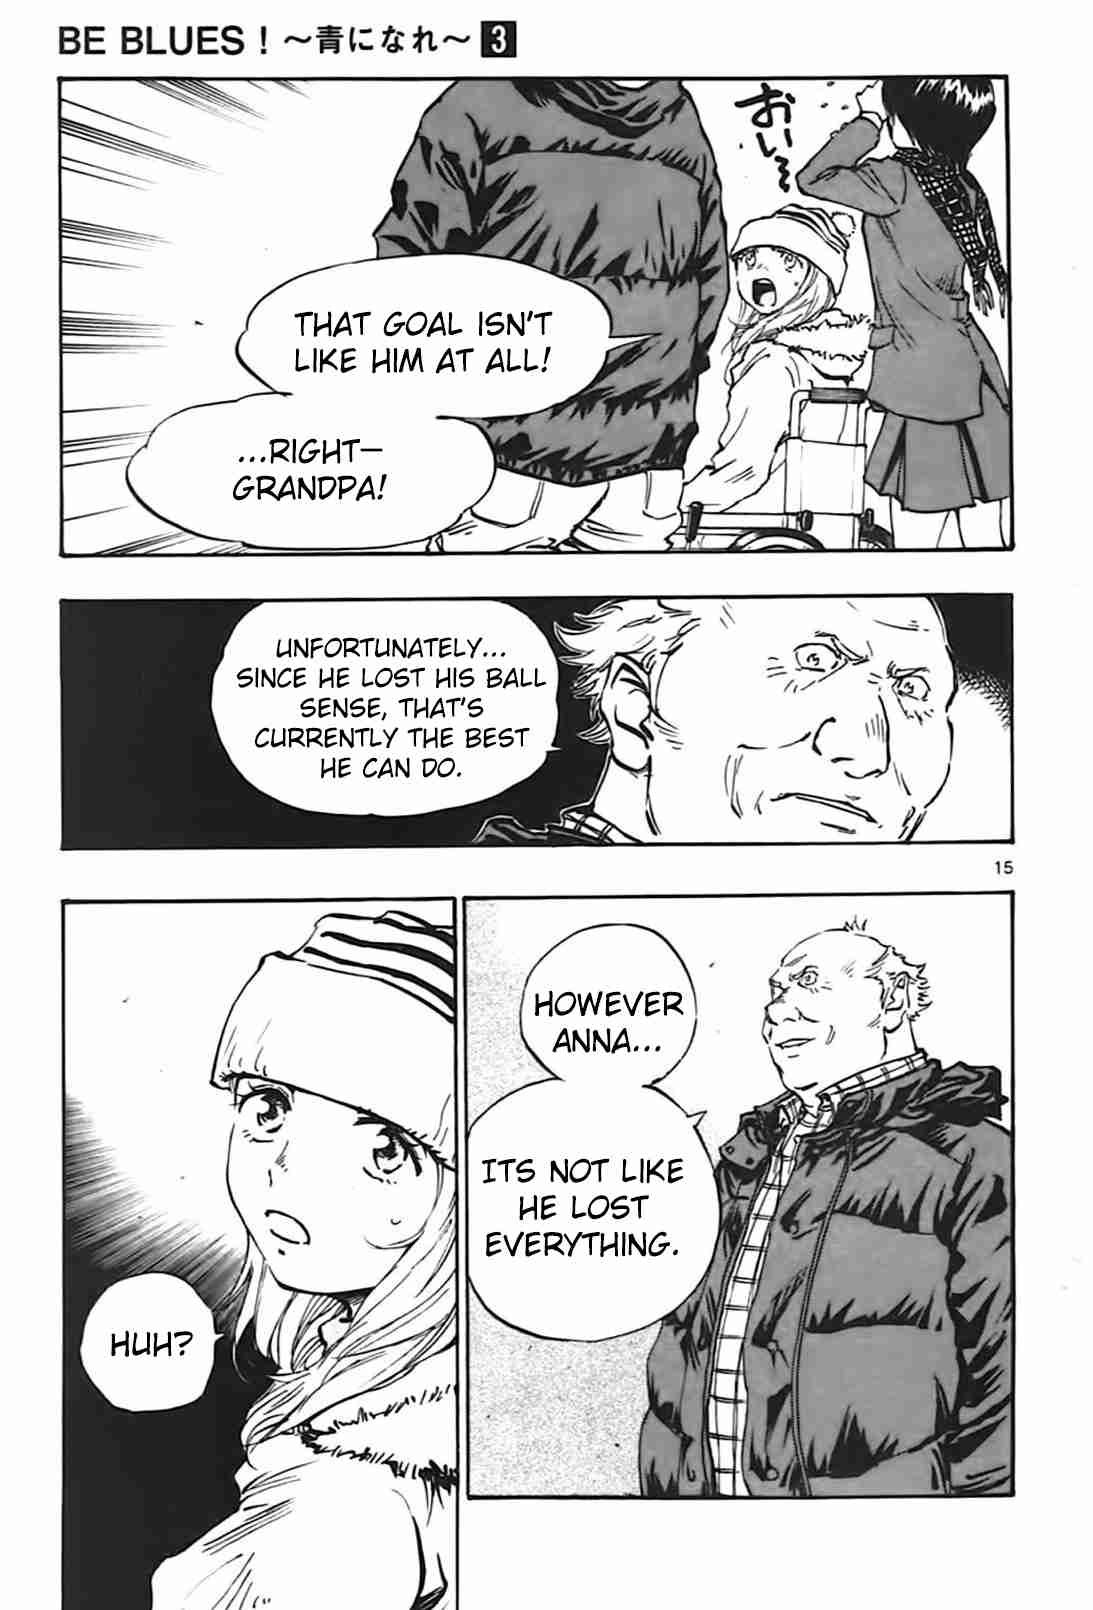 Fights Break Sphere Vol. 3 Ch. 21 What The Current Me Can Do